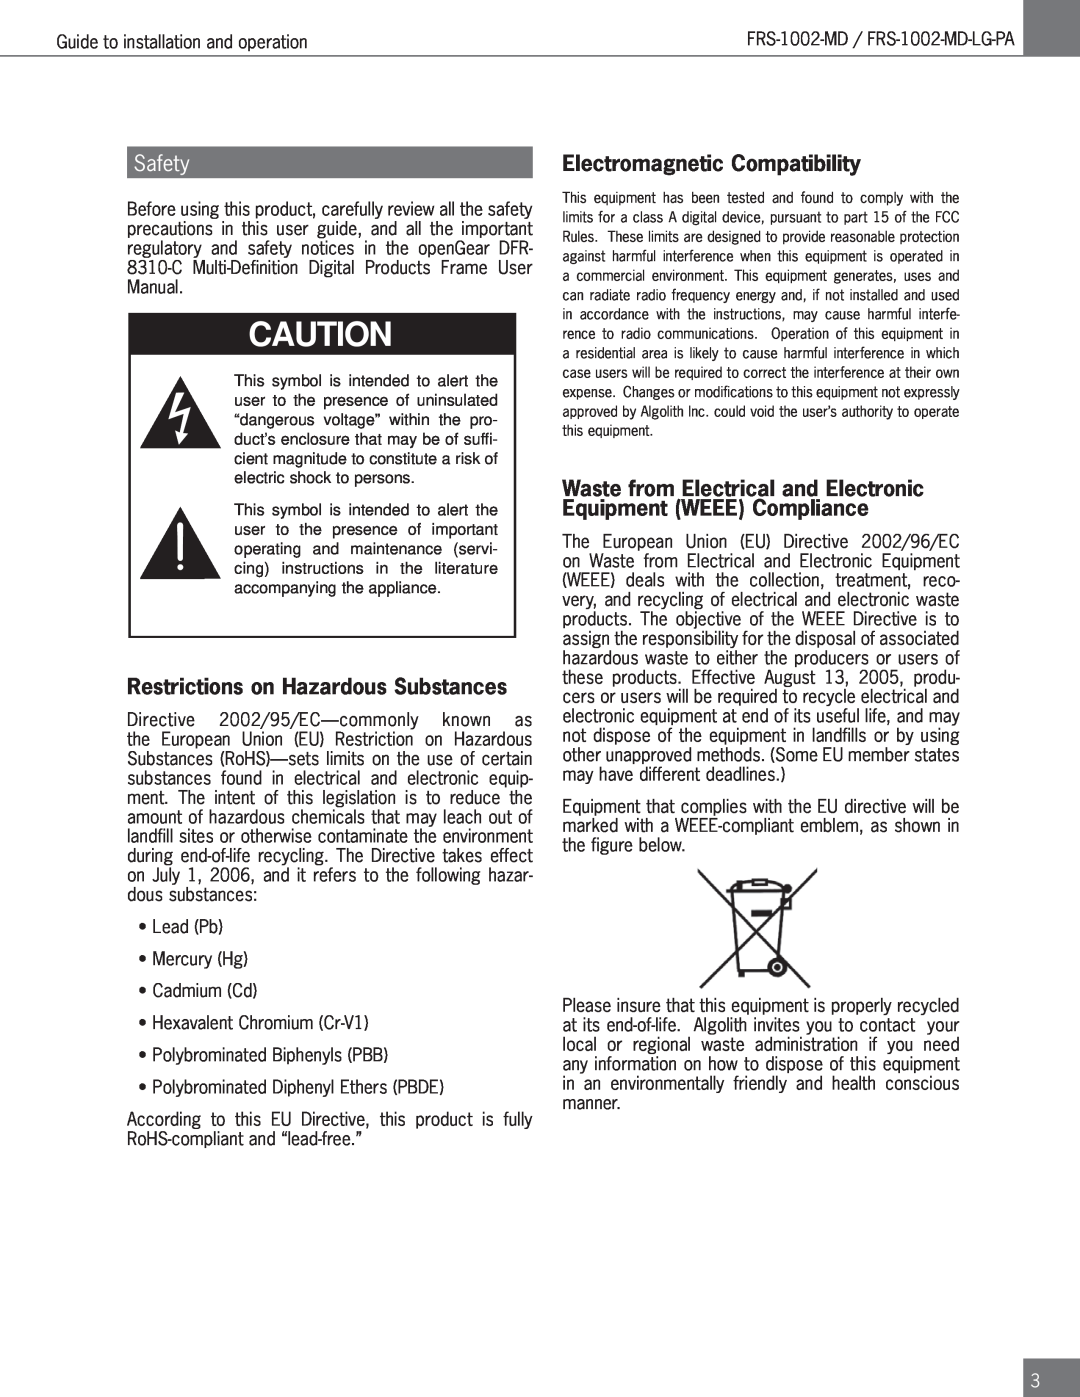 Algolith FRS-1002-MD operation manual Restrictions on Hazardous Substances, Electromagnetic Compatibility 